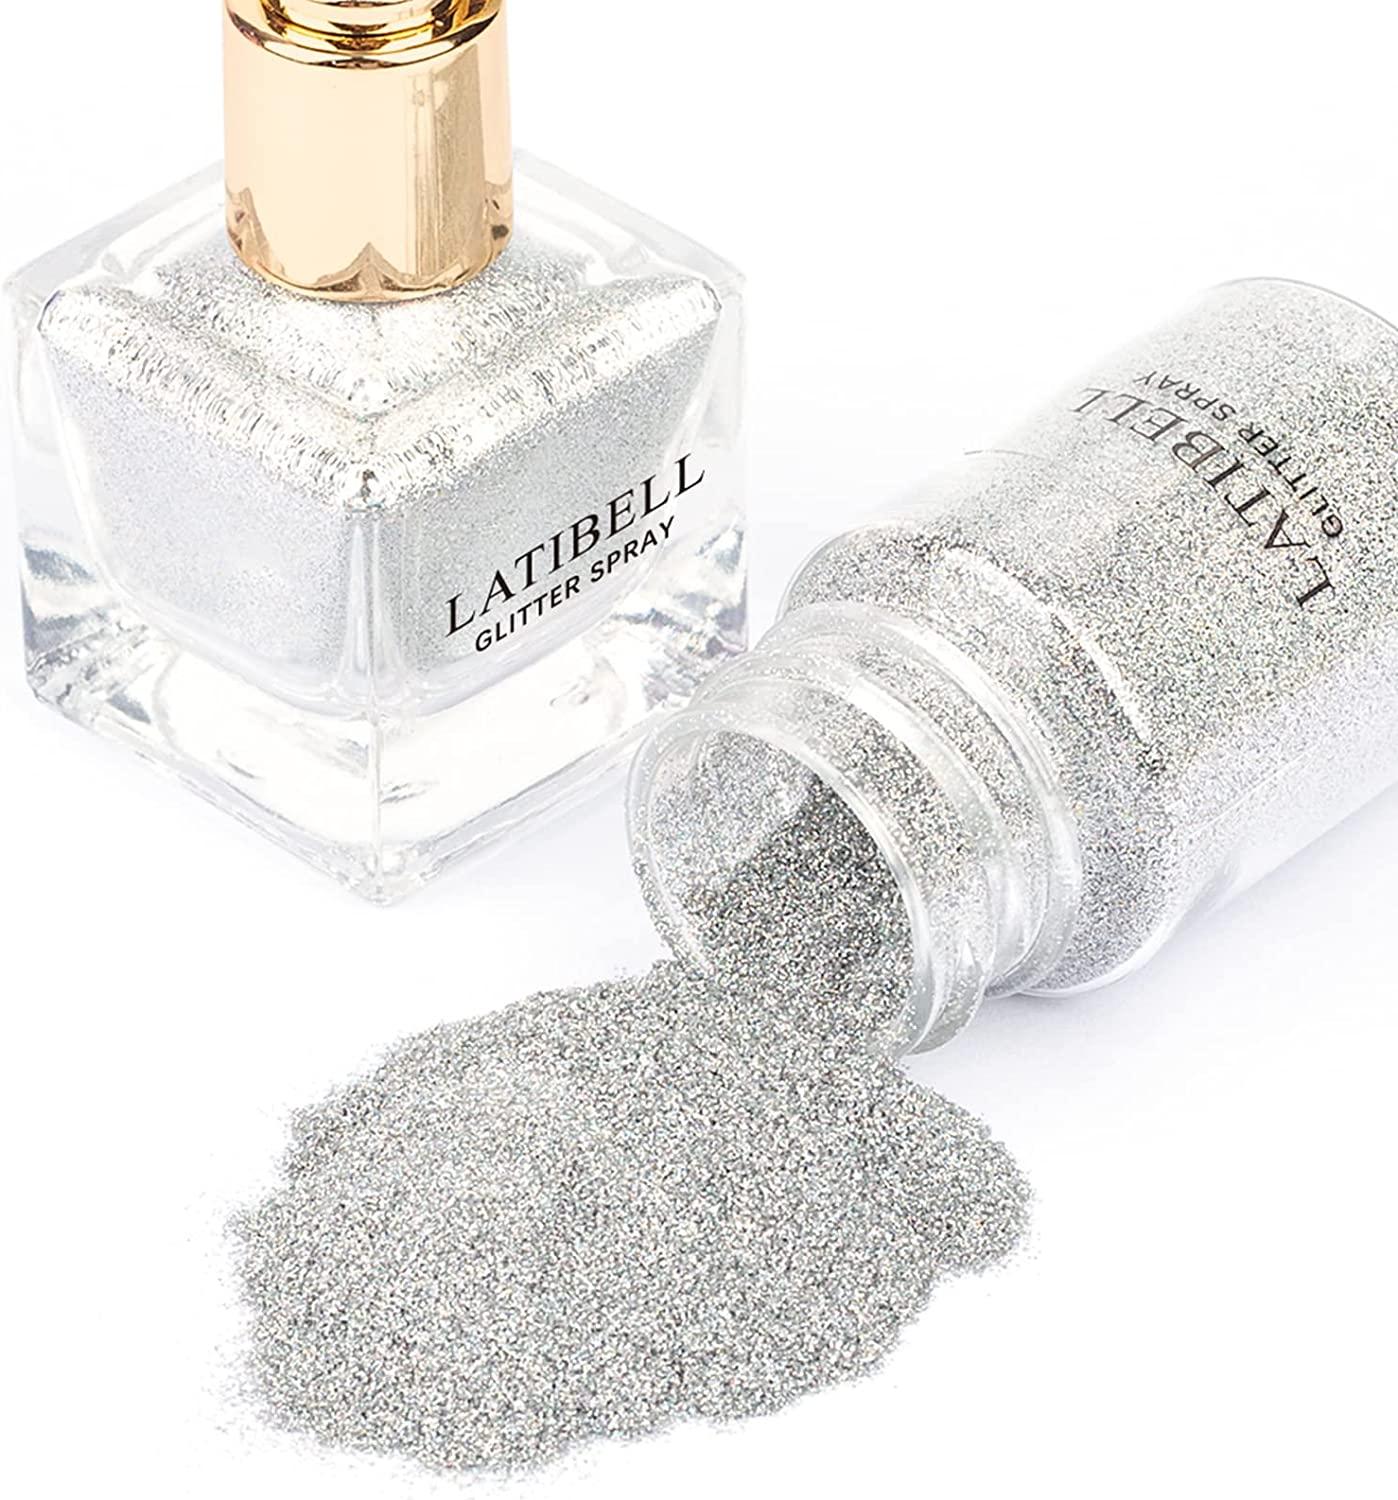 LATIBELL Body Glitter Spray, Silver Glitter Spray for Hair and Body, Glitter  Body Spray Cosmetic Shimmer Makeup Glitter for Rave Hair Body Face Clothes  Nail Art Craft Design - with 1 Jar